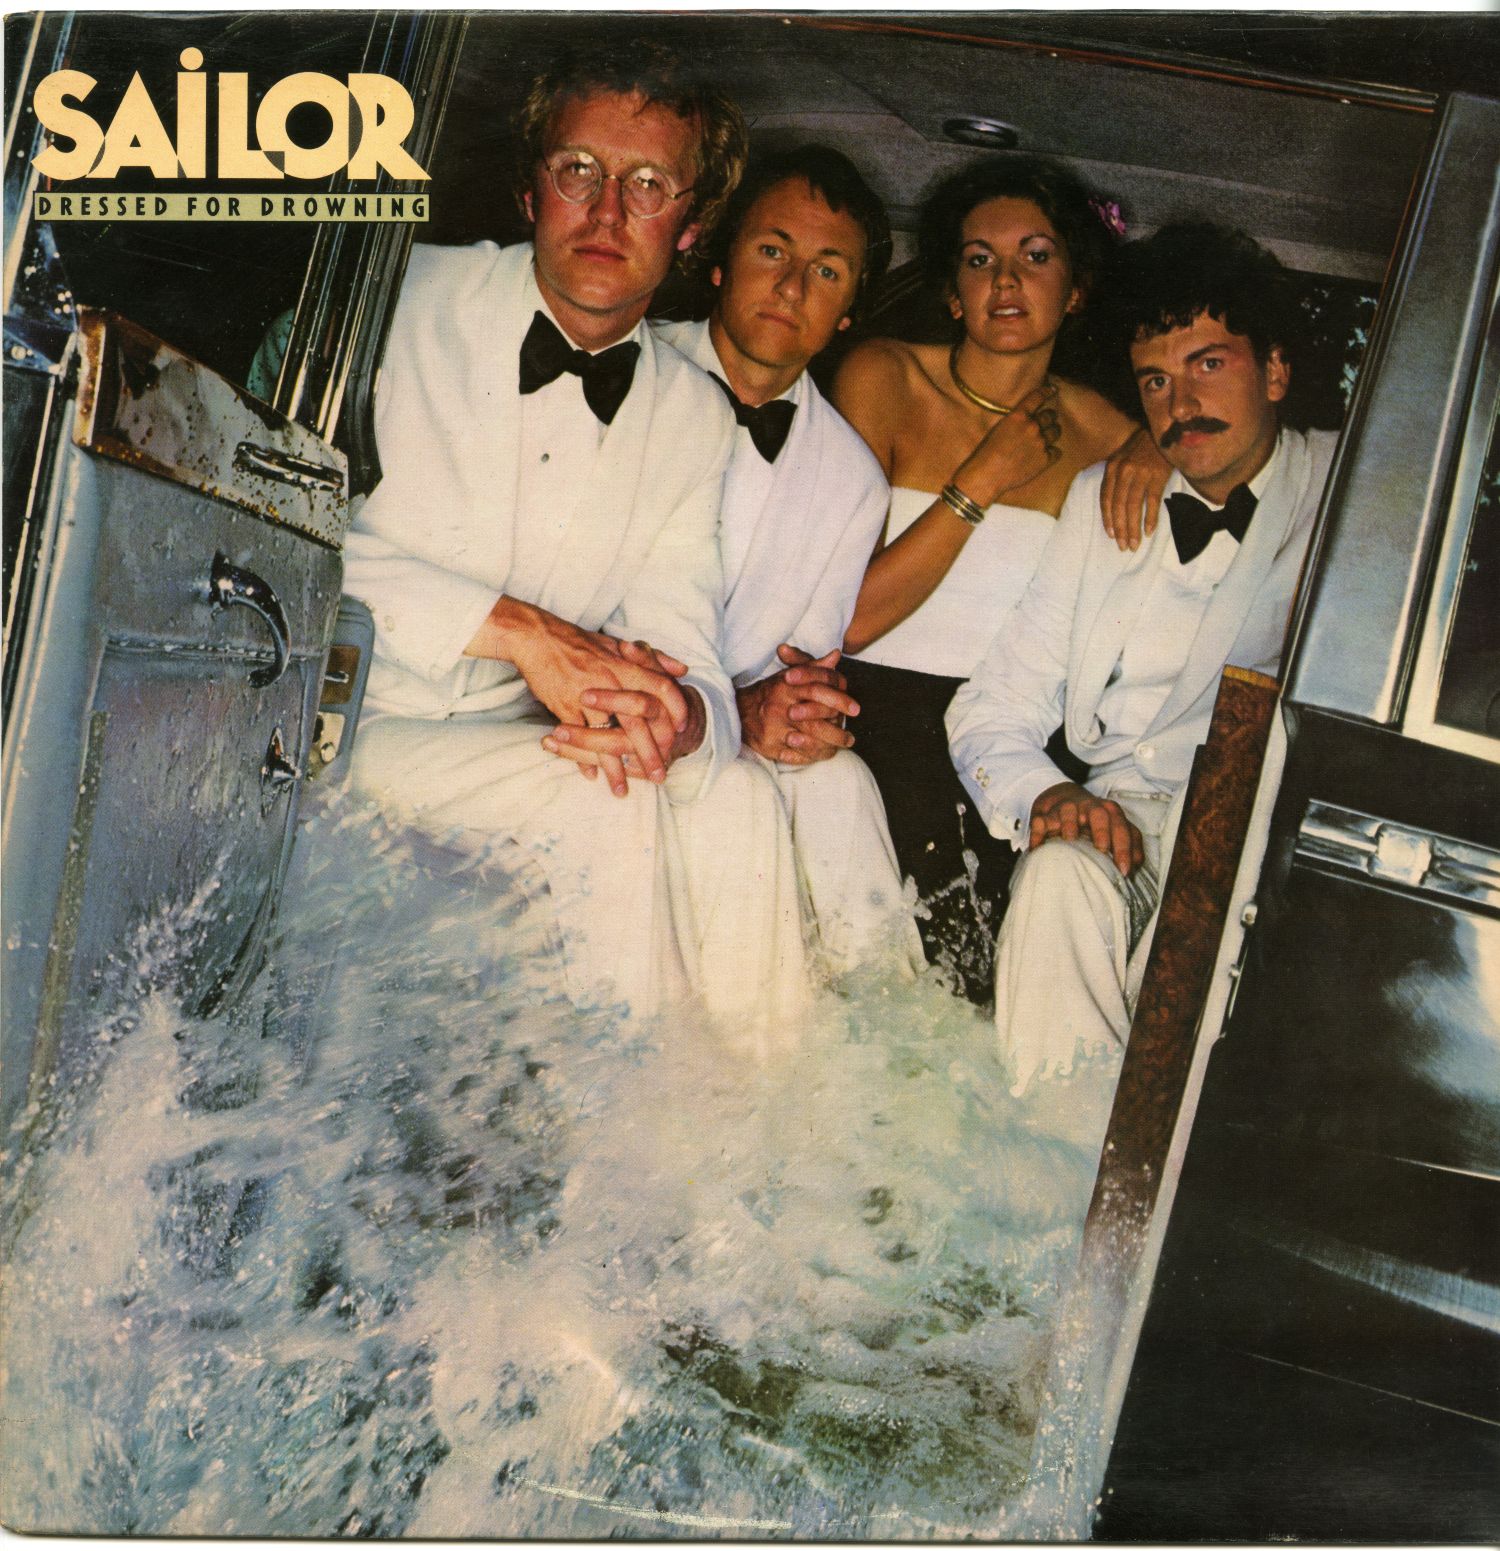 SAILOR『DRESSED FOR DROWNING』（1980年、Calibou Records）アルバムジャケット01